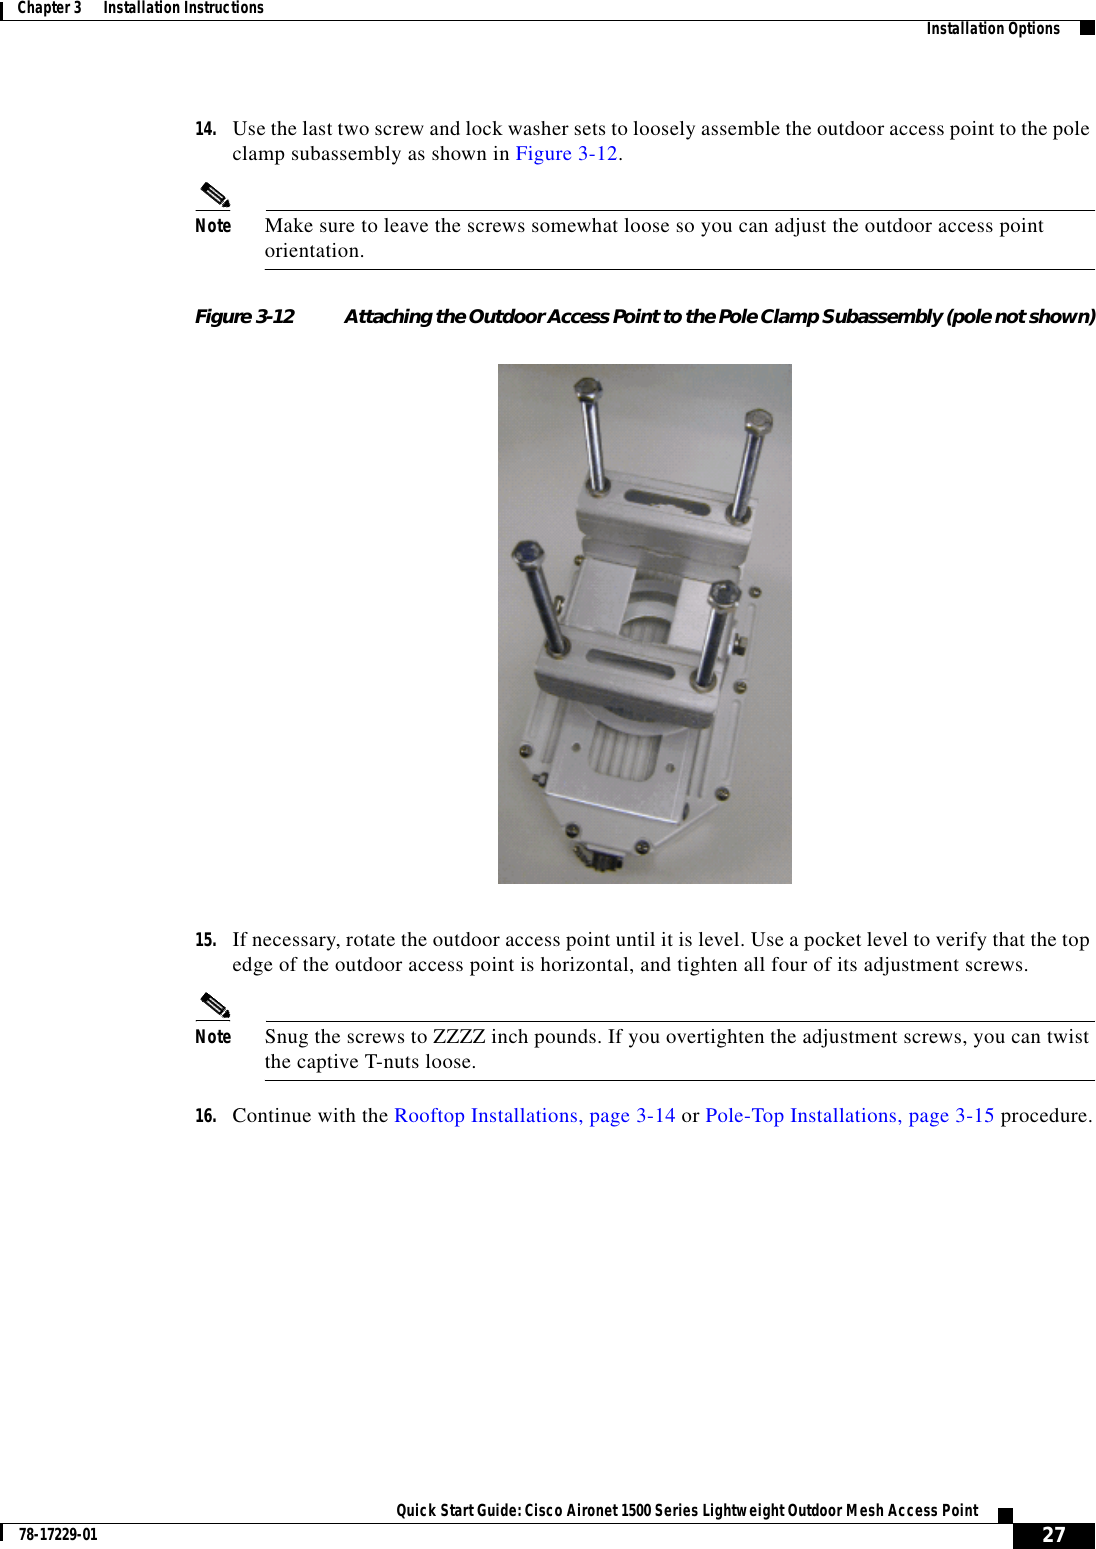  27Quick Start Guide: Cisco Aironet 1500 Series Lightweight Outdoor Mesh Access Point78-17229-01Chapter 3      Installation Instructions   Installation Options14. Use the last two screw and lock washer sets to loosely assemble the outdoor access point to the pole clamp subassembly as shown in Figure 3-12.Note Make sure to leave the screws somewhat loose so you can adjust the outdoor access point orientation.Figure 3-12 Attaching the Outdoor Access Point to the Pole Clamp Subassembly (pole not shown)15. If necessary, rotate the outdoor access point until it is level. Use a pocket level to verify that the top edge of the outdoor access point is horizontal, and tighten all four of its adjustment screws. Note Snug the screws to ZZZZ inch pounds. If you overtighten the adjustment screws, you can twist the captive T-nuts loose.16. Continue with the Rooftop Installations, page 3-14 or Pole-Top Installations, page 3-15 procedure.